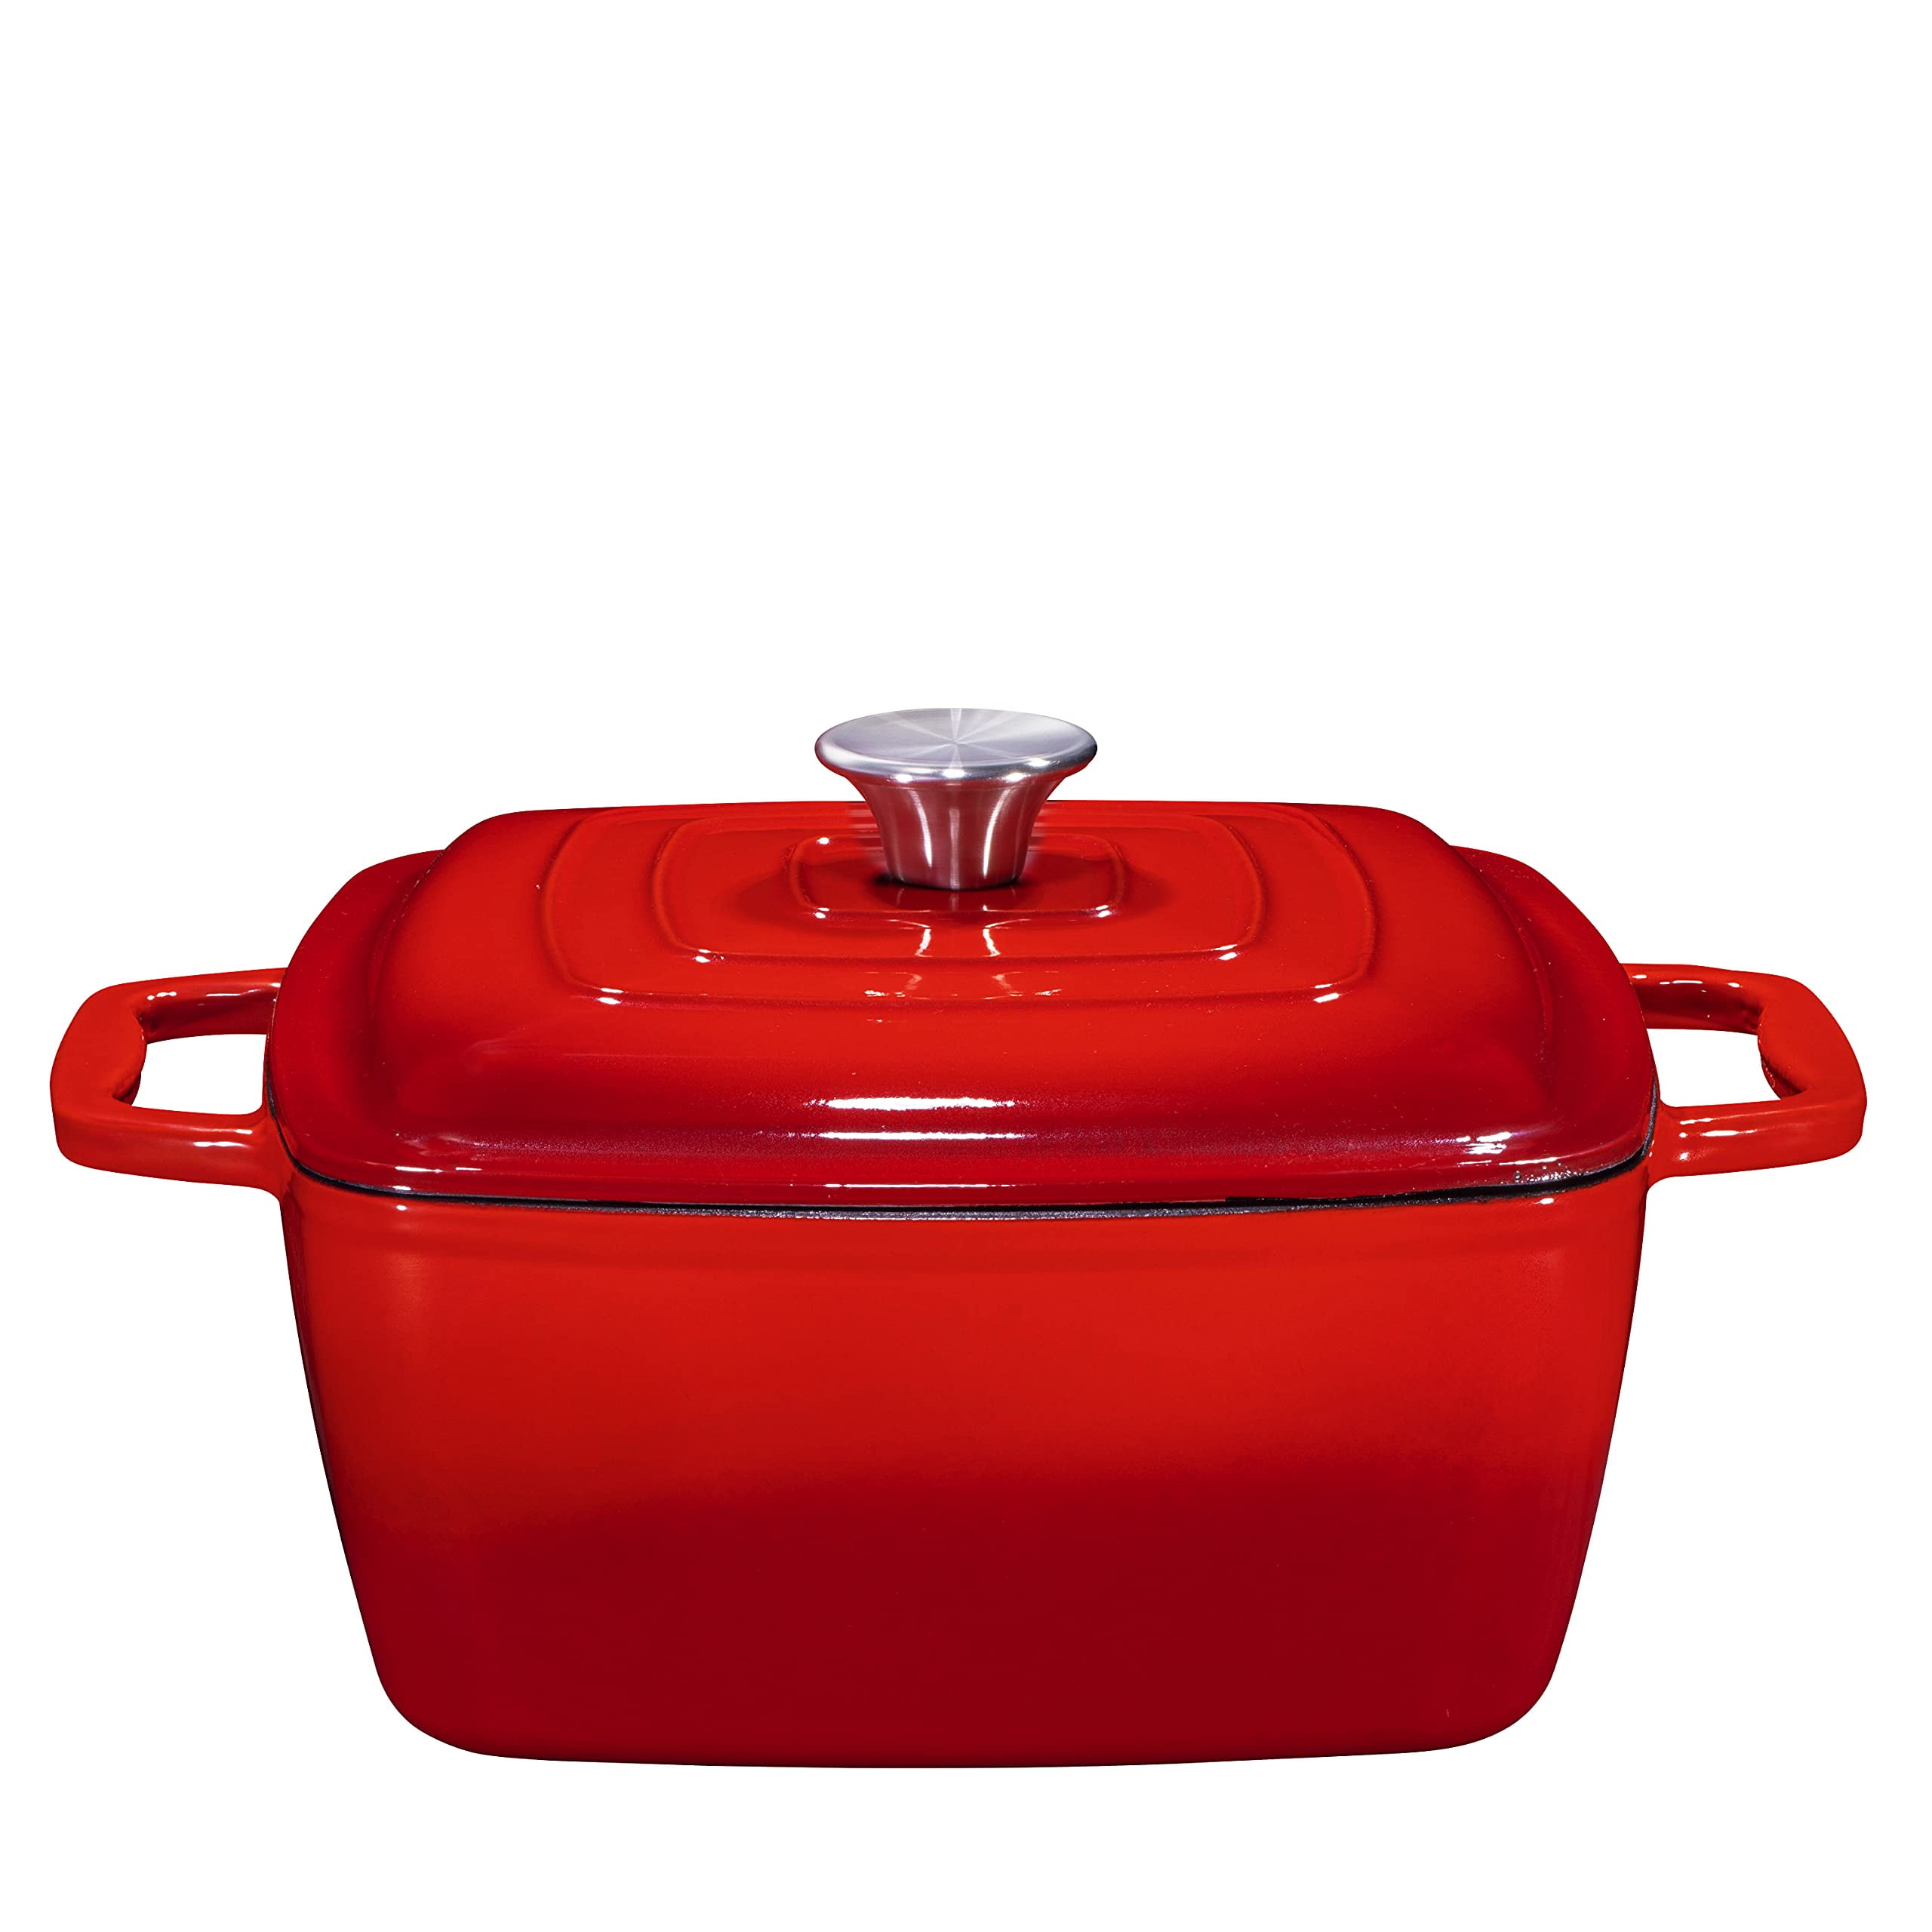 ROYDX Dutch Oven Pot with Lid, Enameled Cast Iron Coated Dutch  Oven,Casserole Dish, Braiser Pan with Dual Handles for Bread Baking,  Cooking, Oven